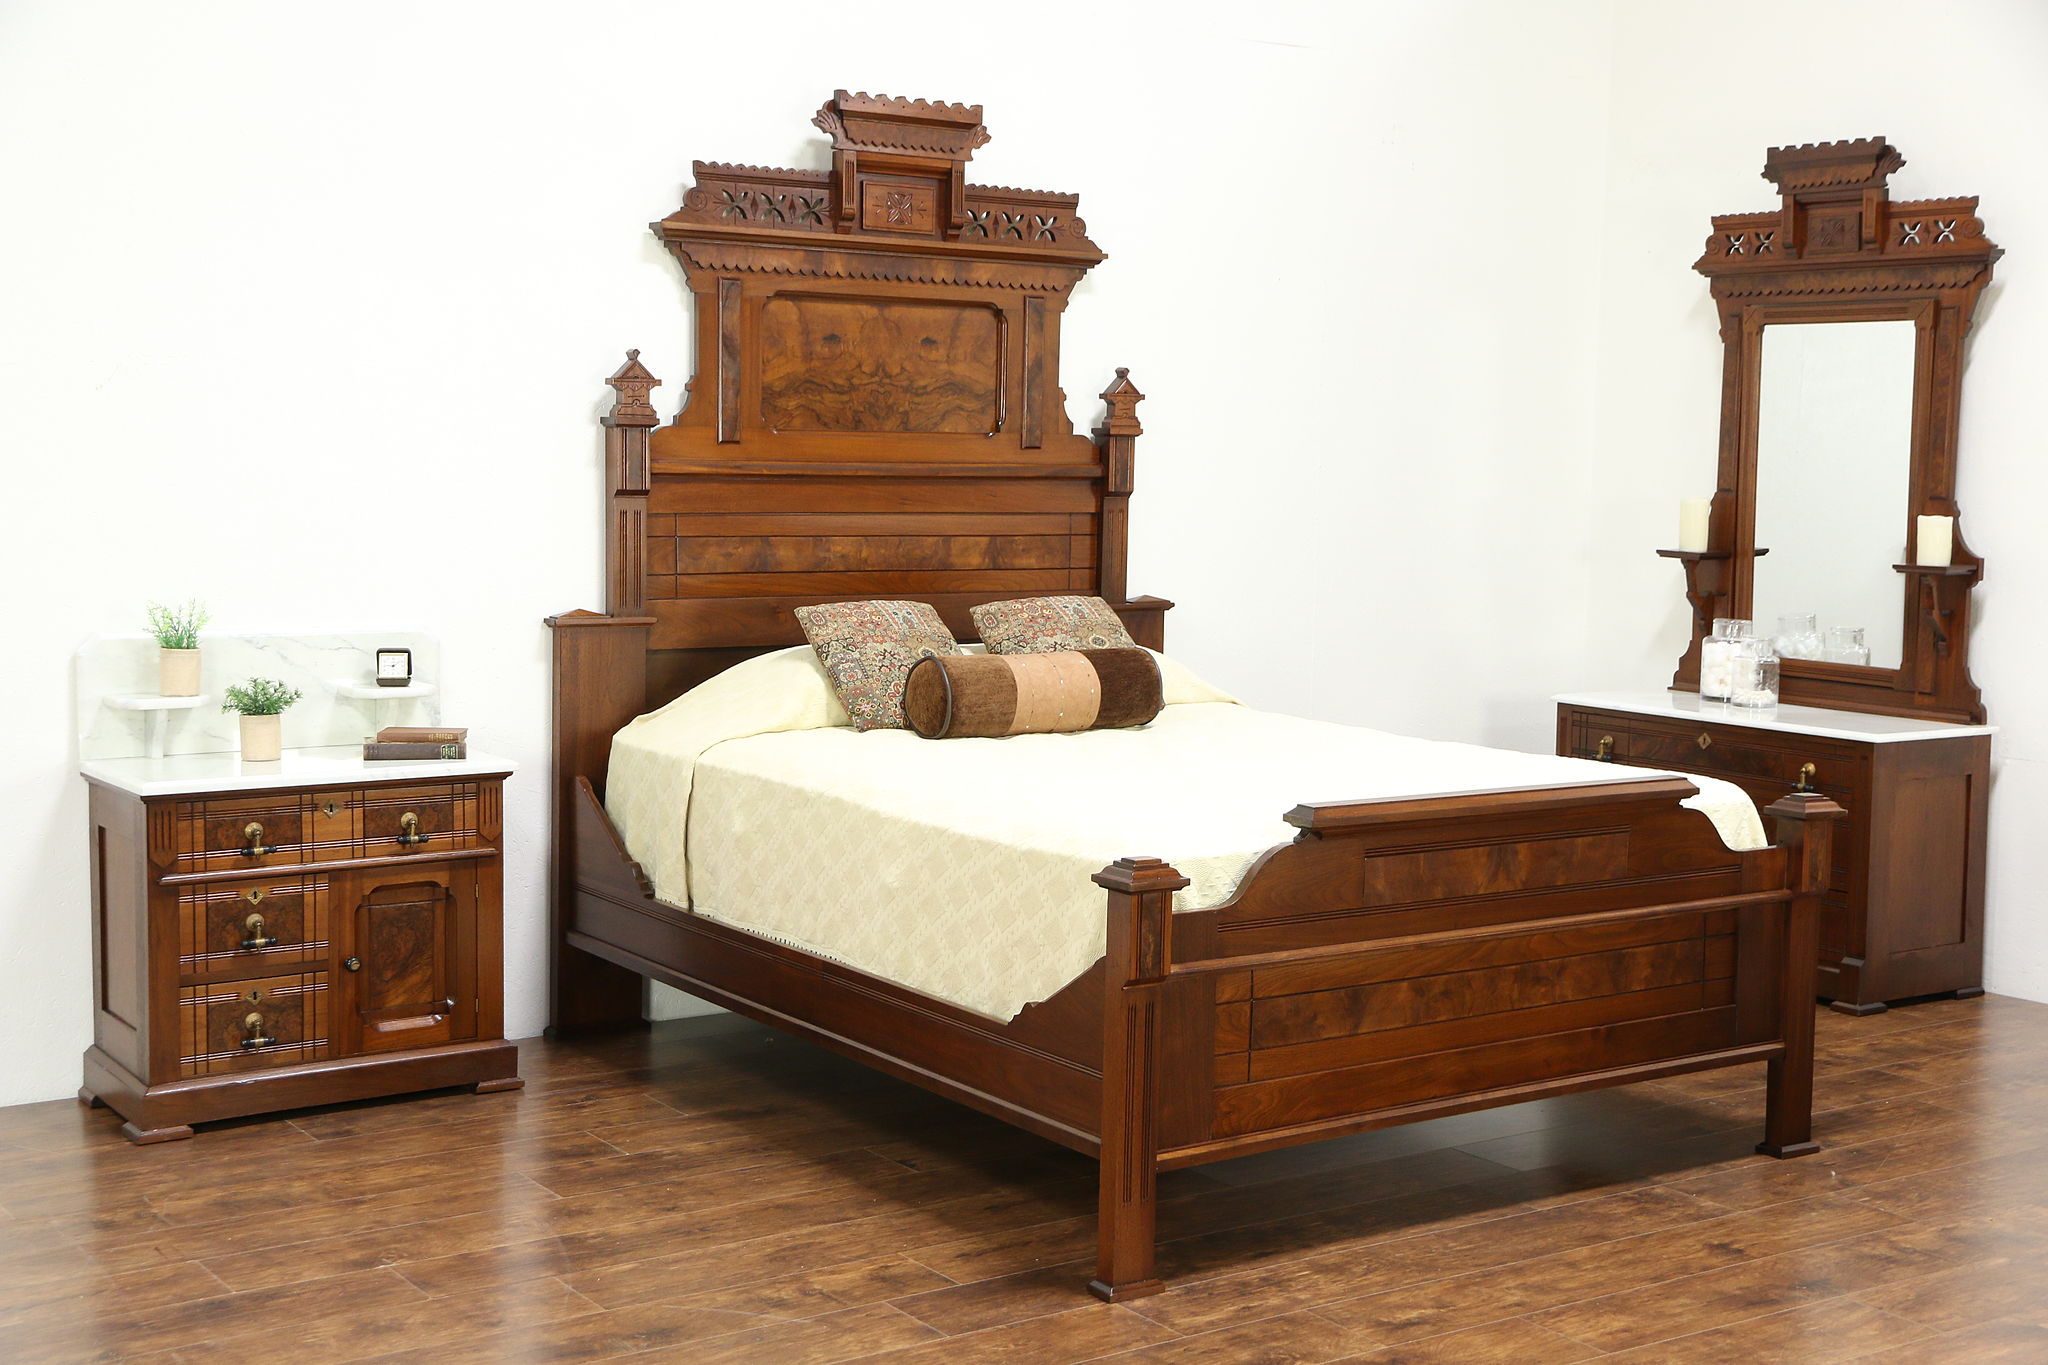 Sold Victorian Eastlake Antique 1875 Walnut Queen Size 3 Pc Bedroom Set Marble Tops Harp Gallery Antiques Furniture,How To Bleach Clothes Fashion